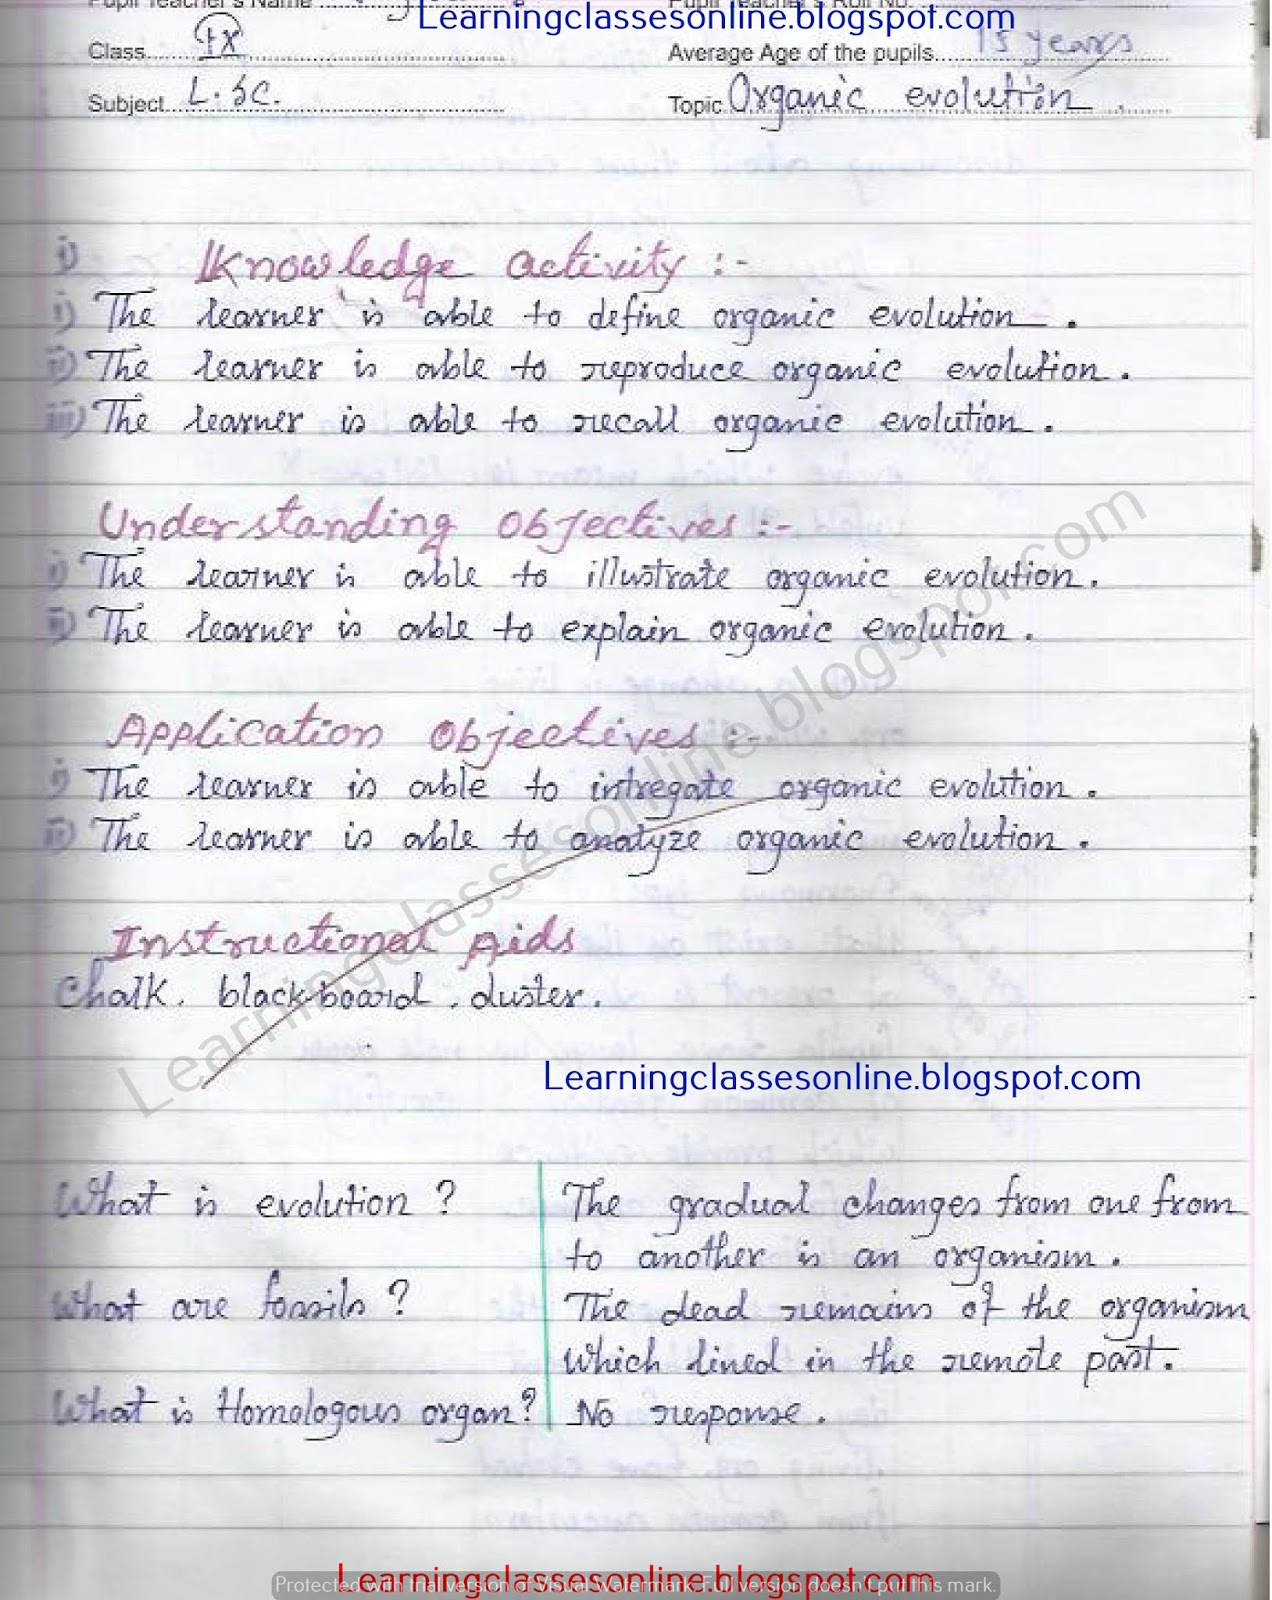 Lesson Plan Of Biology For B.ed In English